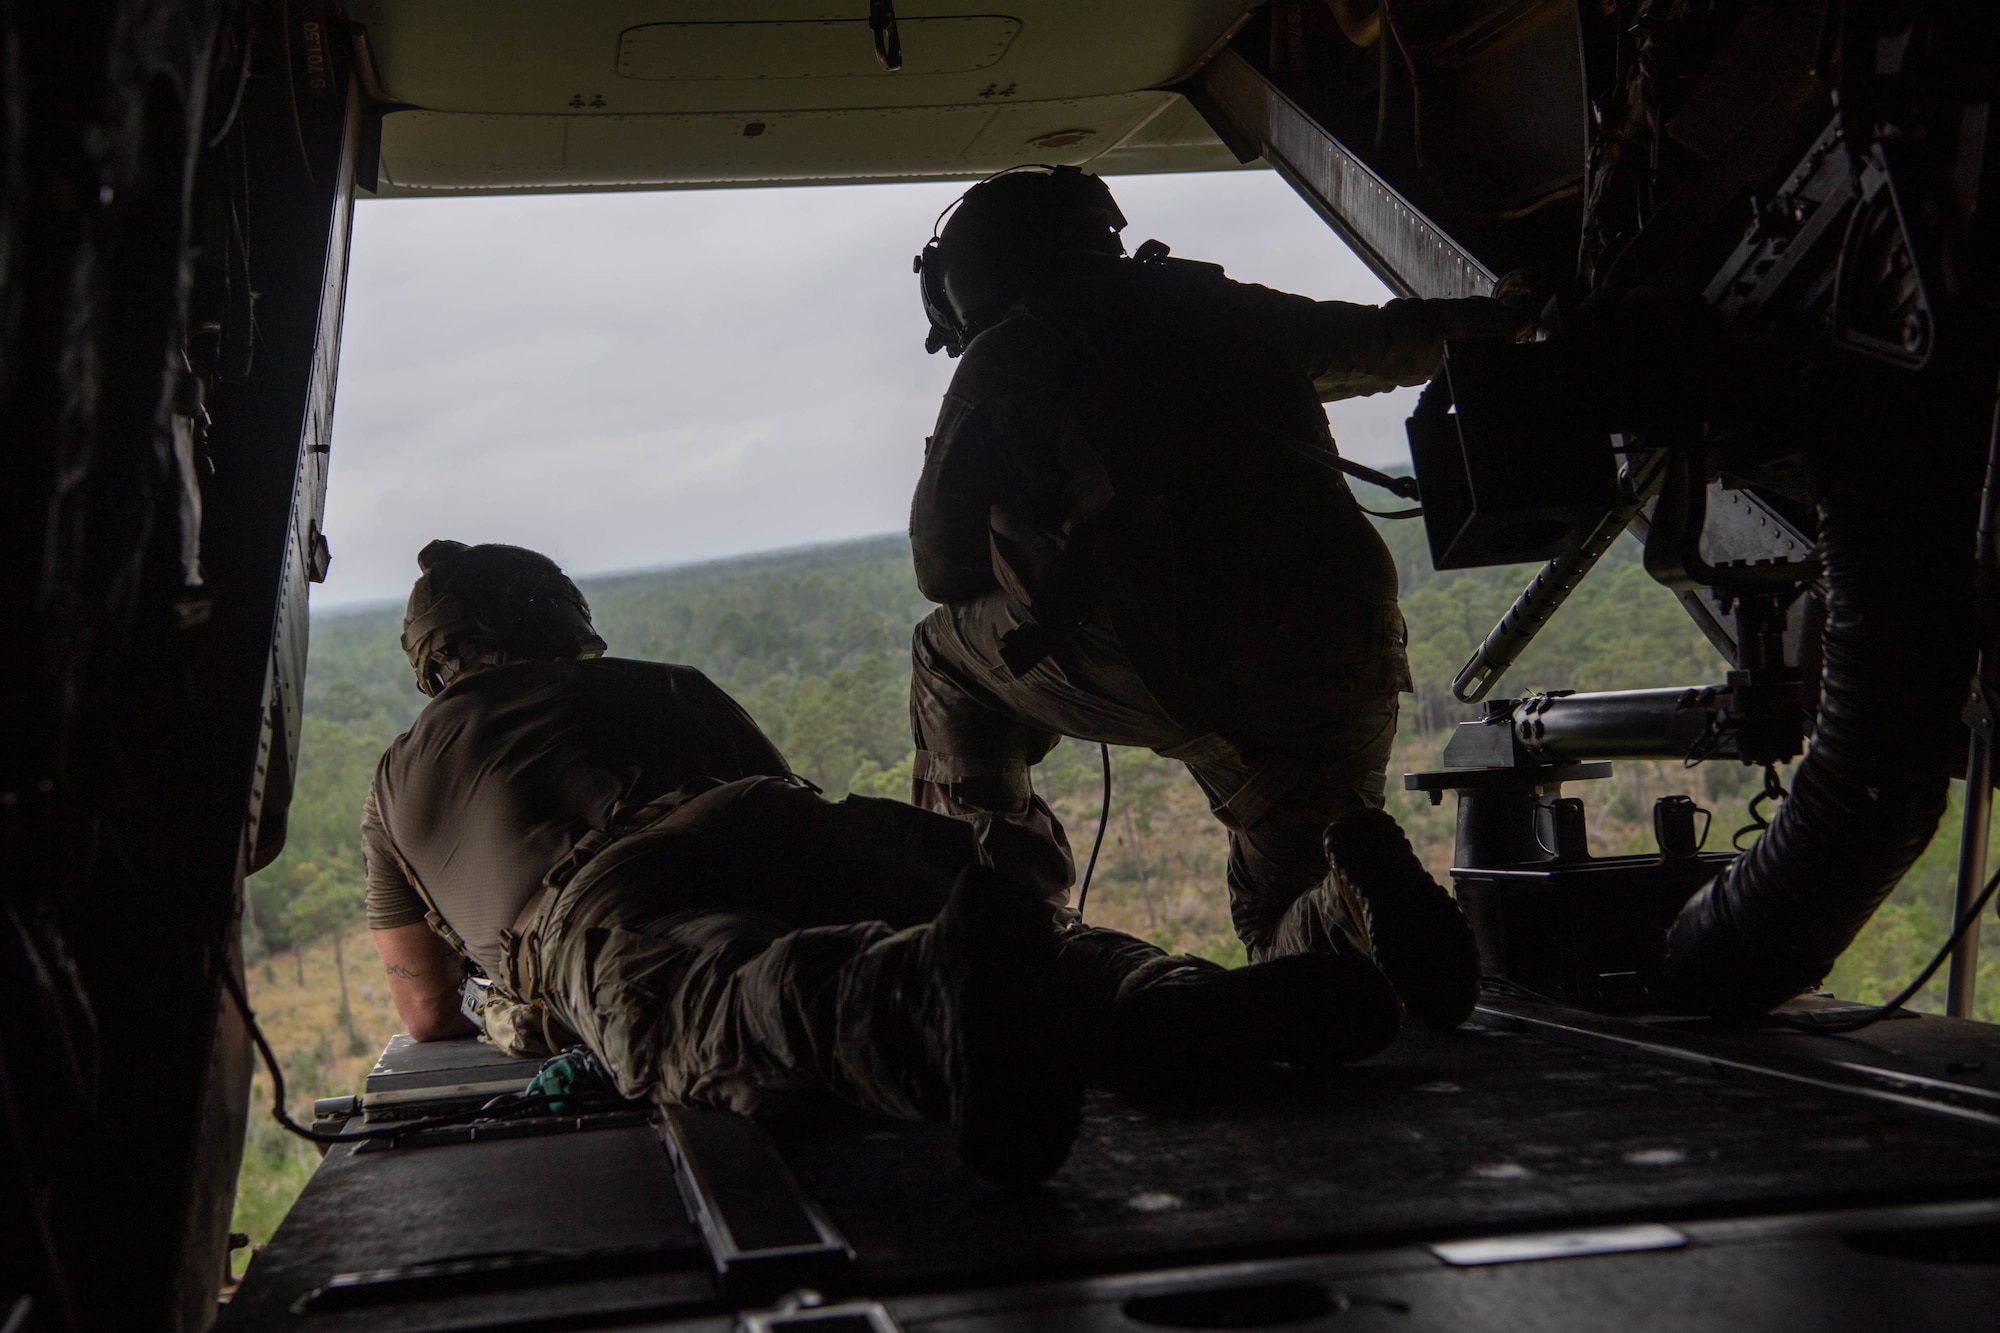 As we look out of the open ramp of a dual-rotor helicoper, a Special Tactics operator lies on the left as a kneeling flight engineer operates equipment to his right as they survey the ground below the helicopter looking for victims of the simulated disaster.